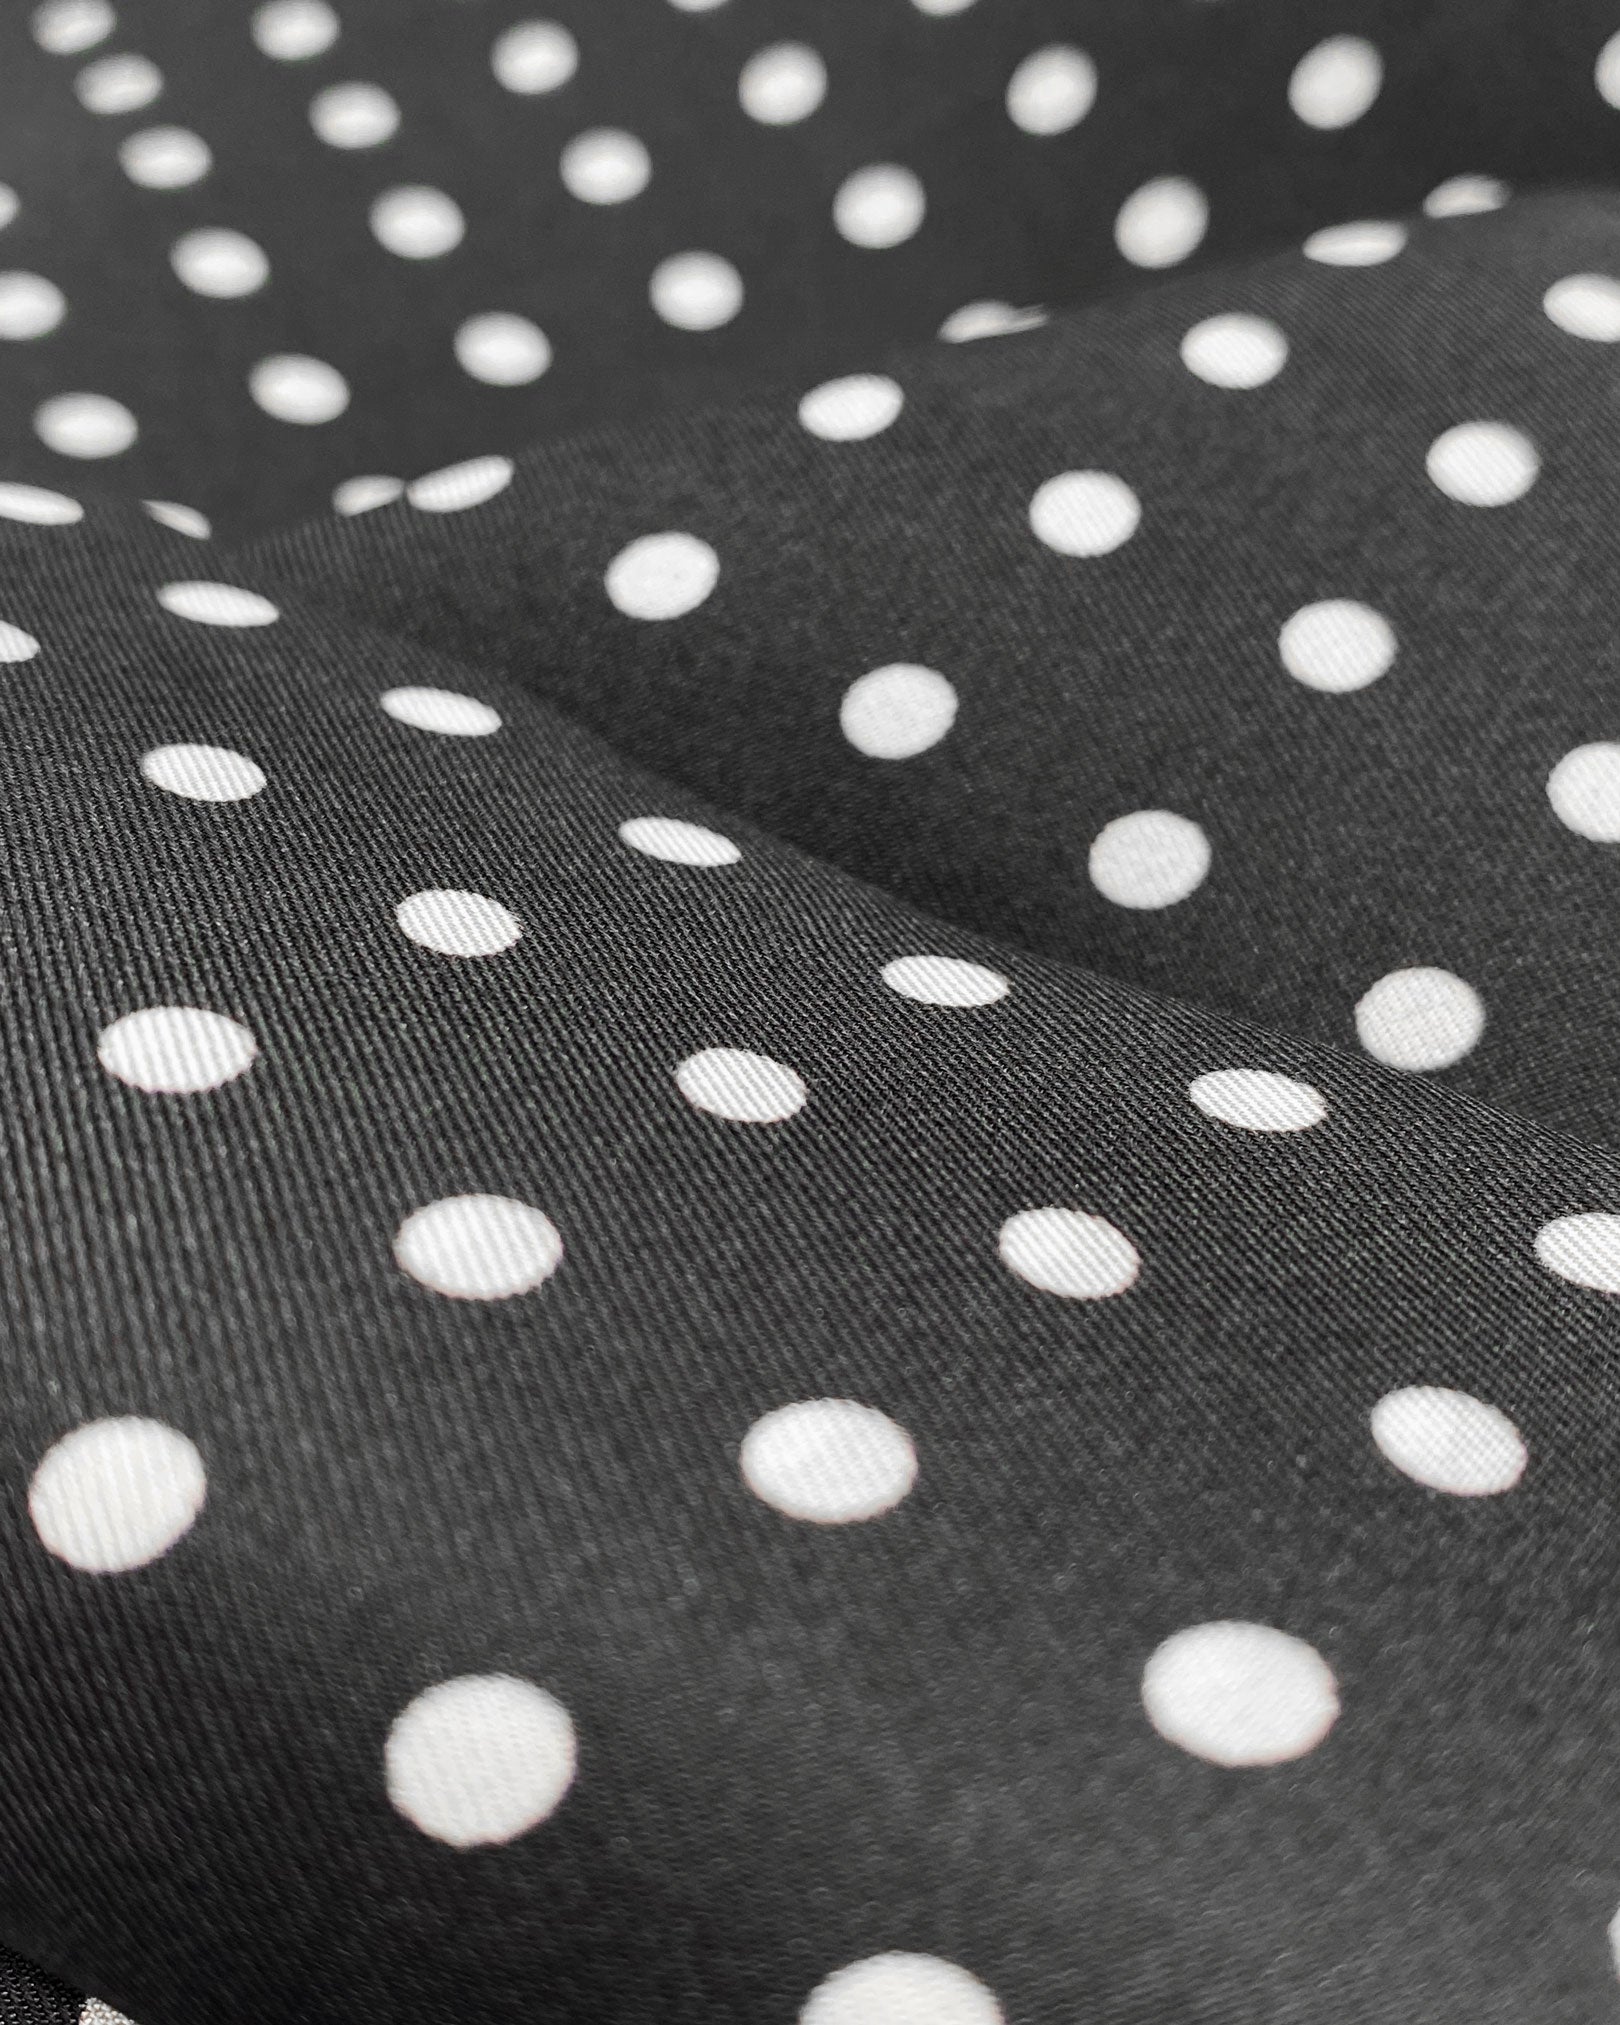 Ruffled close-up view of the 'Shinagwa' silk aviator scarf, presenting a closer view of the white polka dot pattern and subtle lustre of the material.